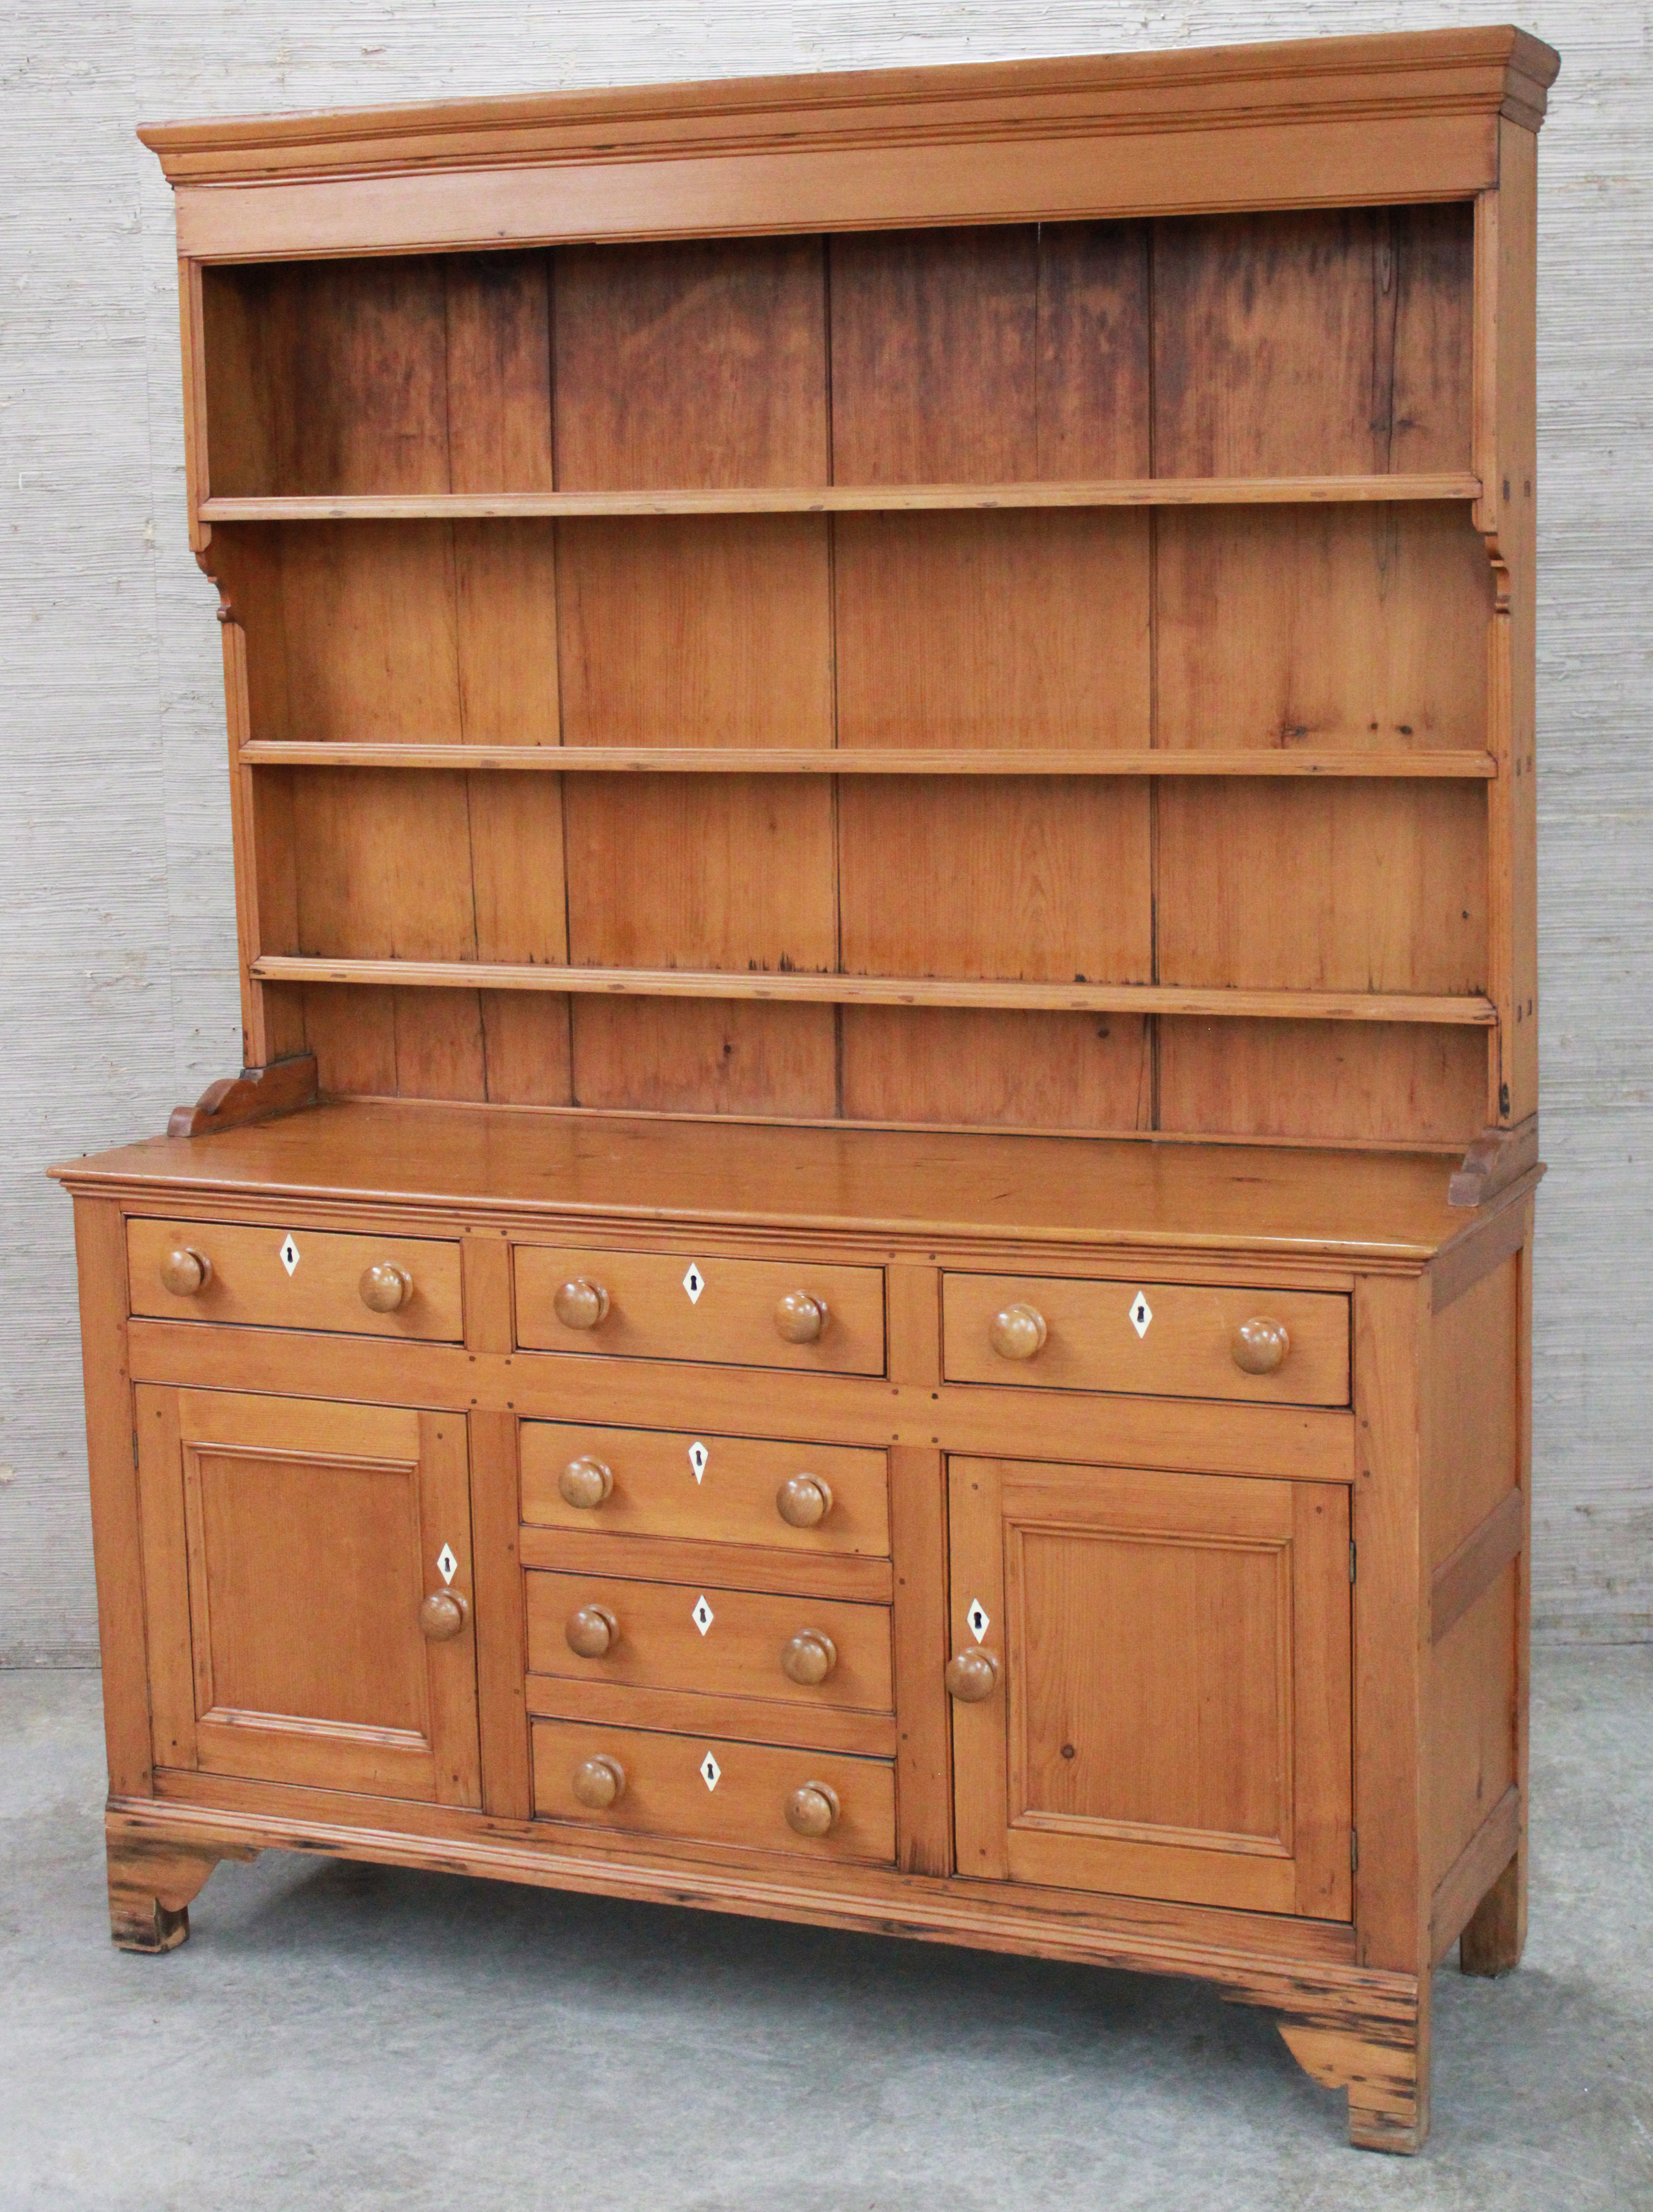 19TH C. WELSH DRESSER WITH MORTICE